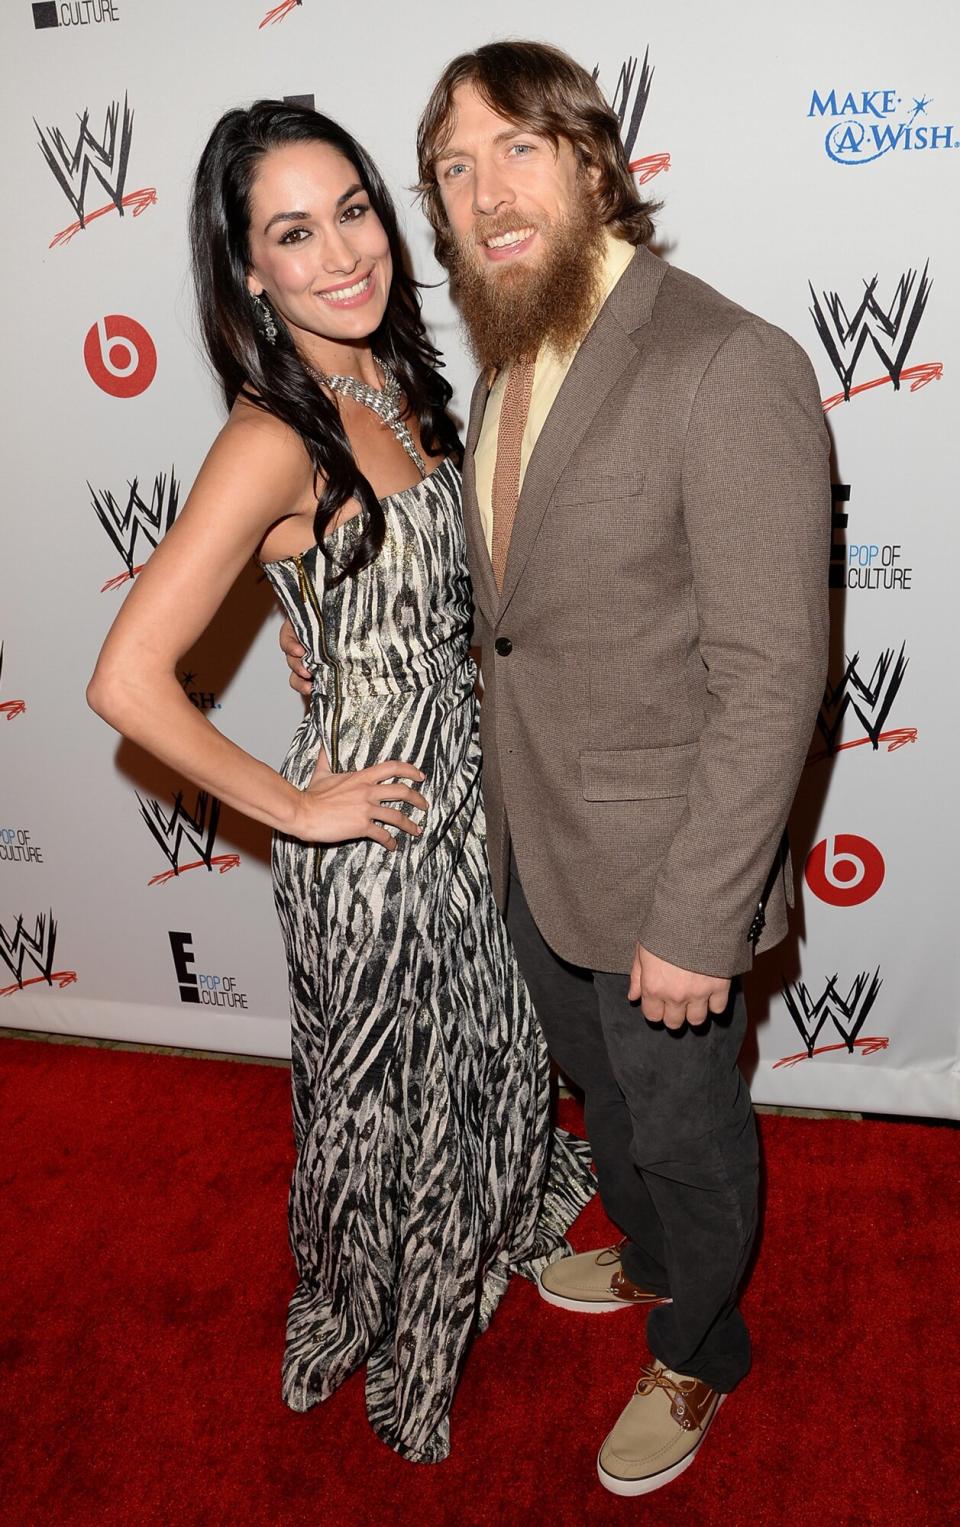 Brie Bella (L) and wrestler Daniel Bryan attend WWE & E! Entertainment's "SuperStars For Hope" at the Beverly Hills Hotel on August 15, 2013 in Beverly Hills, California